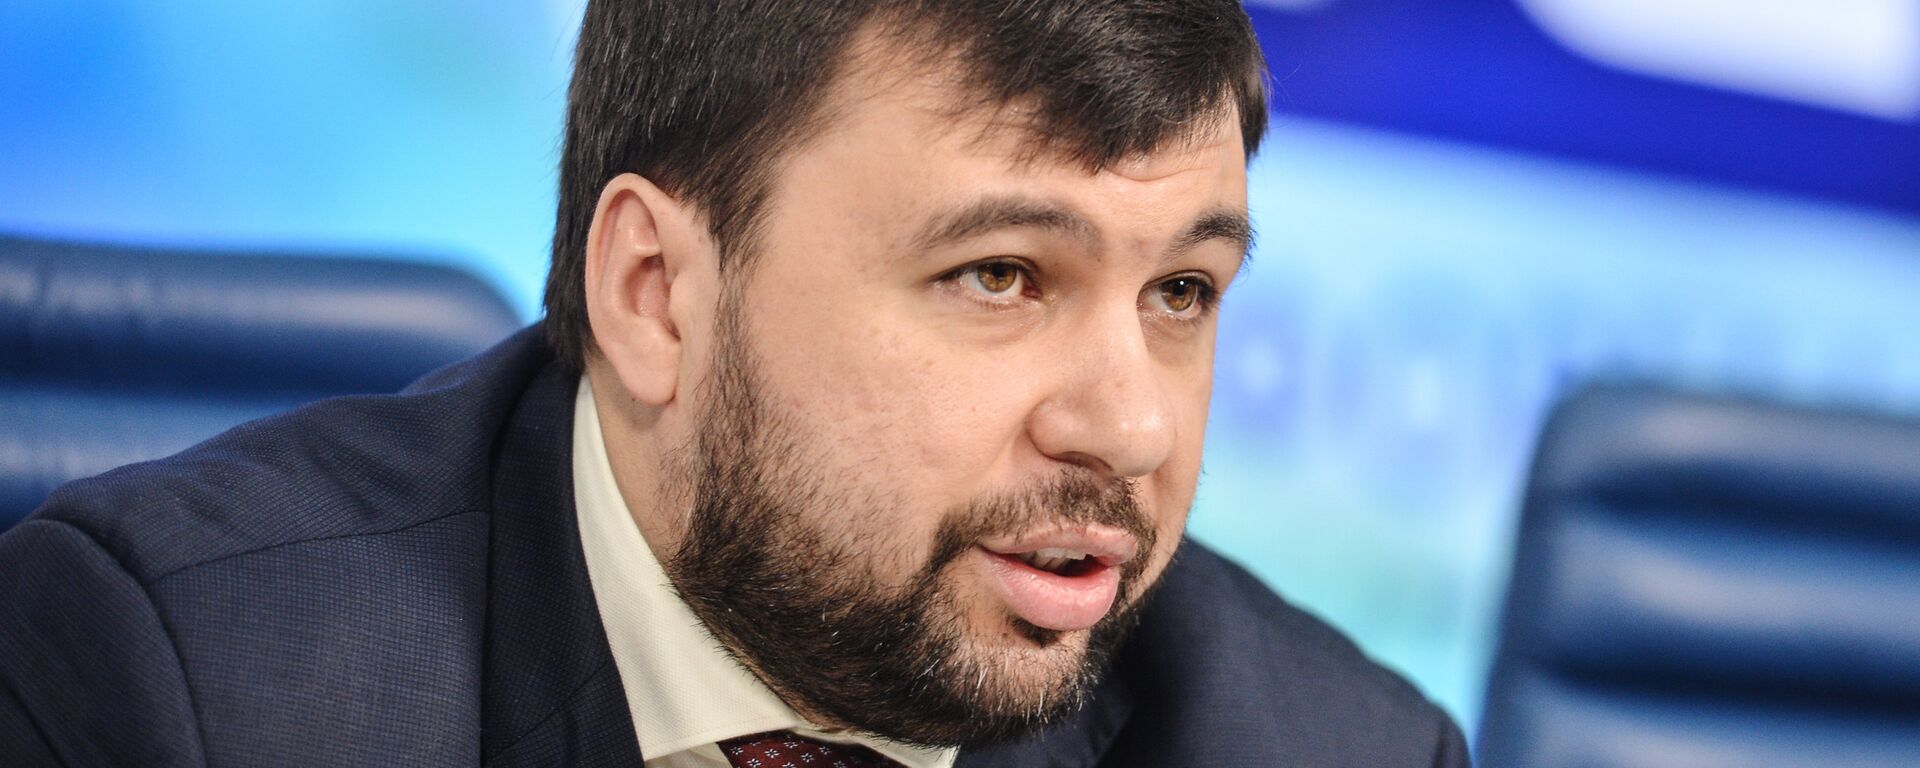 Denis Pushilin, representative of the Donetsk People's Republic for the settlement of the situation in eastern Ukraine - Sputnik International, 1920, 21.02.2023